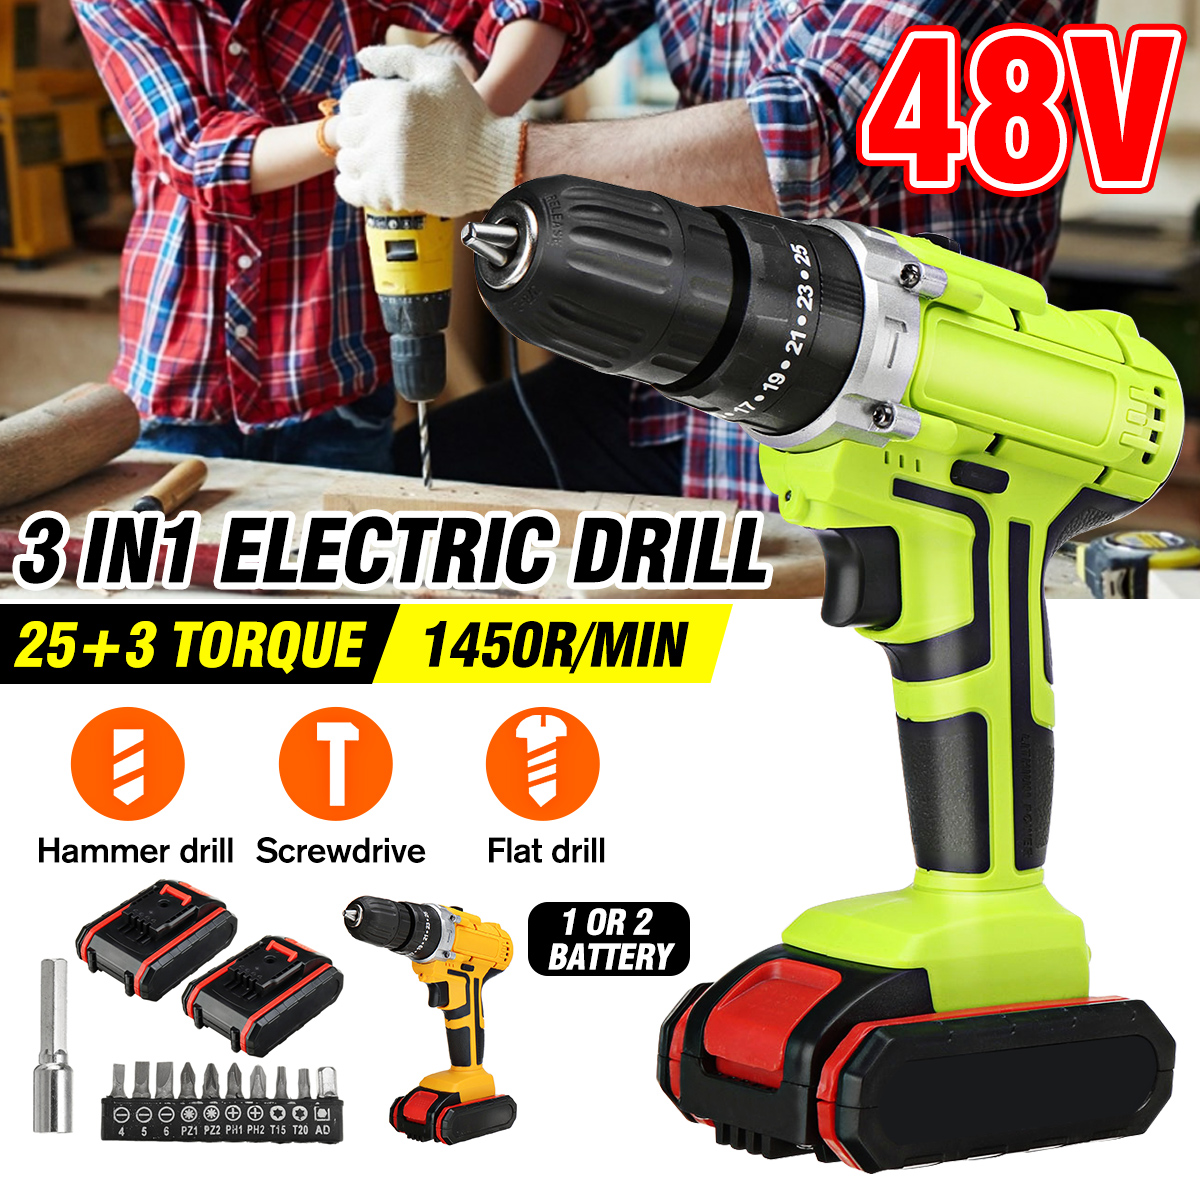 48VF-22800mAh-Cordless-Rechargable-3-In-1-Power-Drills-Impact-Electric-Drill-Driver-With-2Pcs-Batter-1877445-2